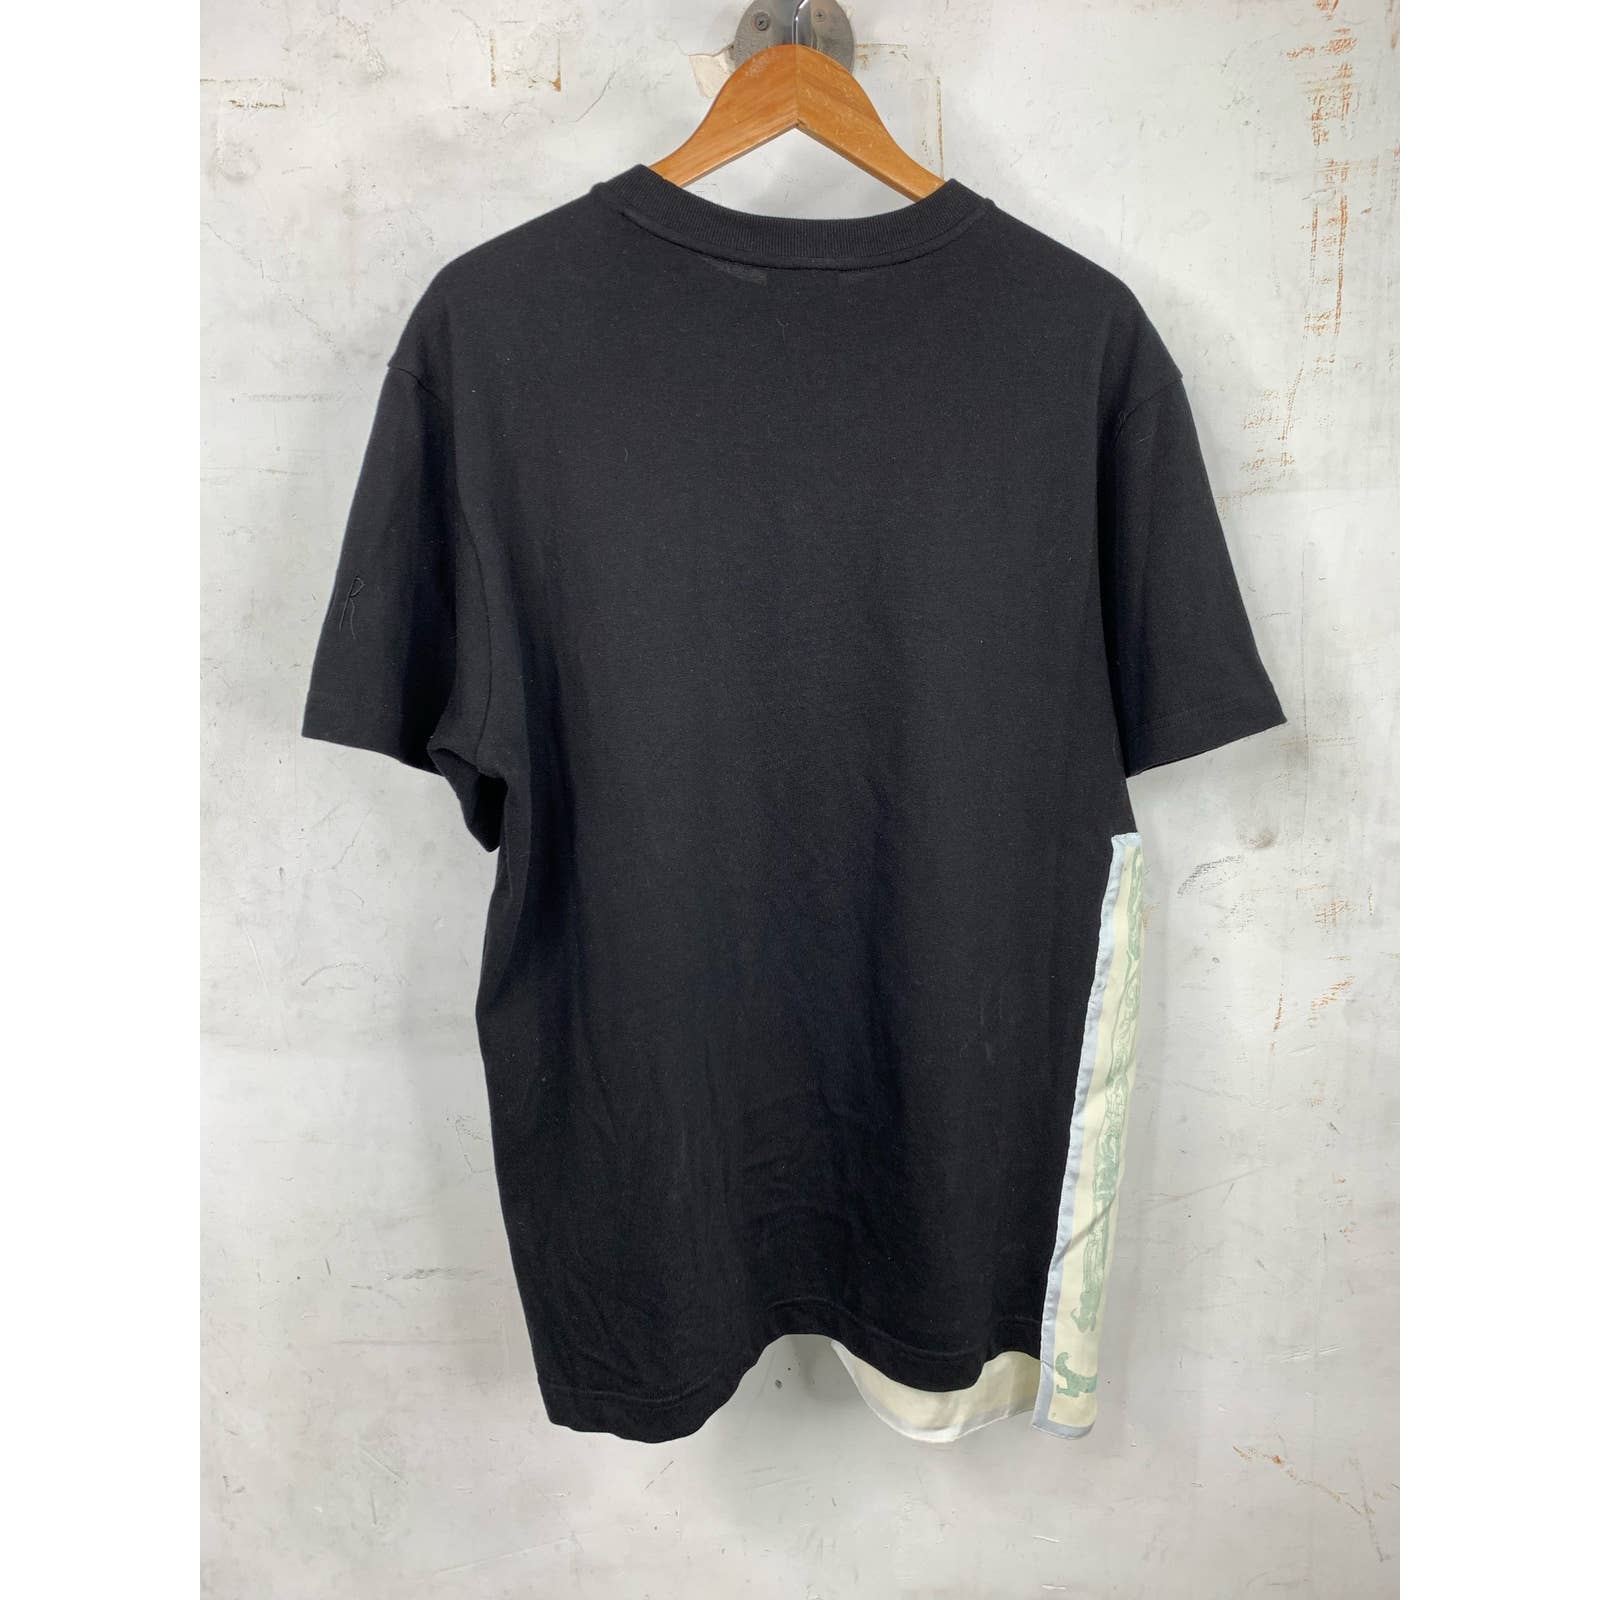 Dior Homme Sewn Graphic Tee